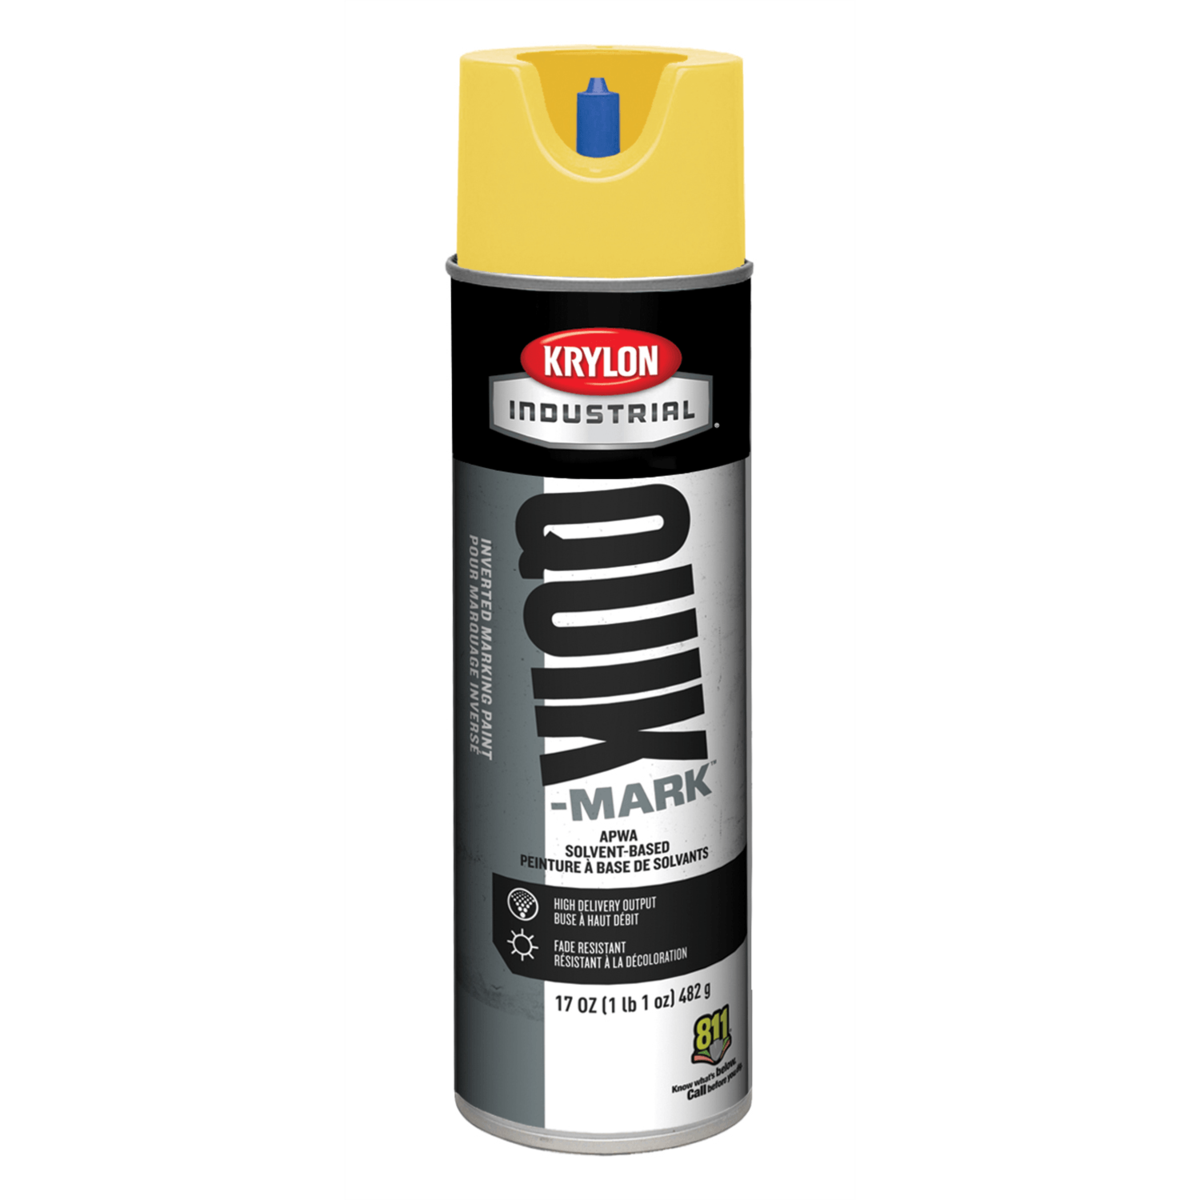 Krylon® Industrial Quik-Mark™ Solvent-Based Inverted Marking Paint, APWA High Visibility Yellow